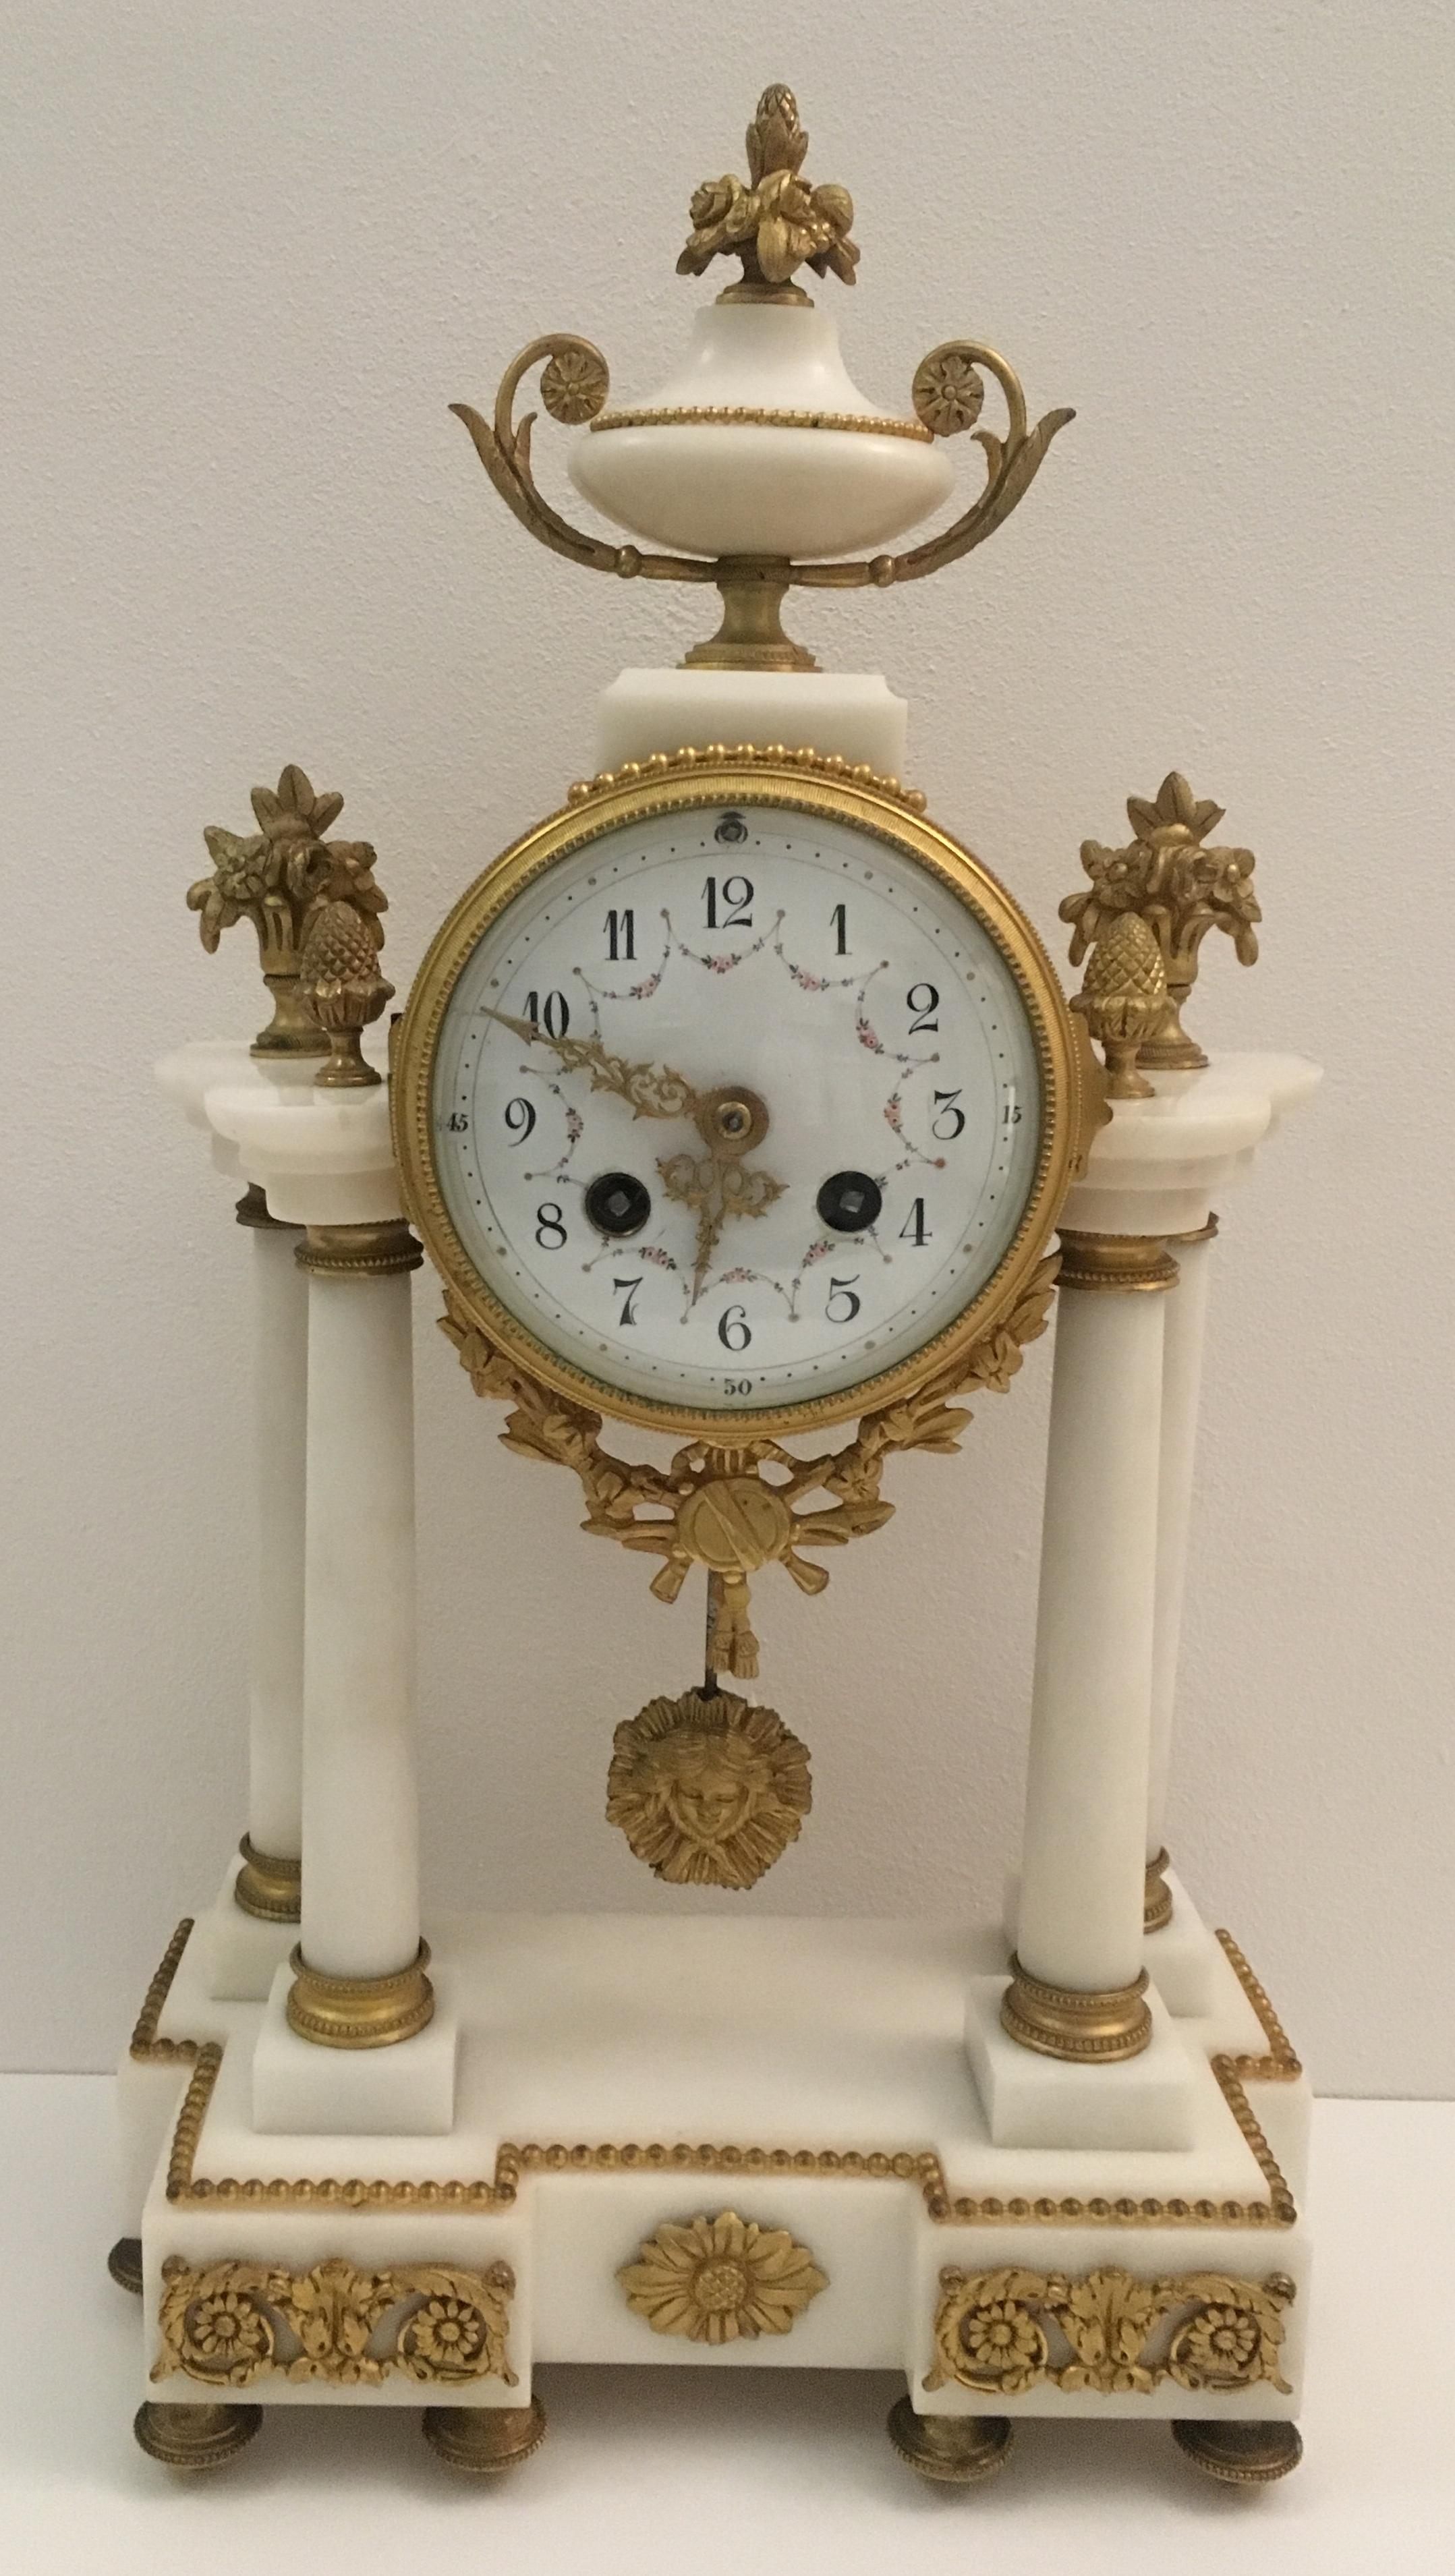 Hand-Crafted 19th Century French Louis XVI Style Ormolu and White Marble Boudoir Clock Set For Sale